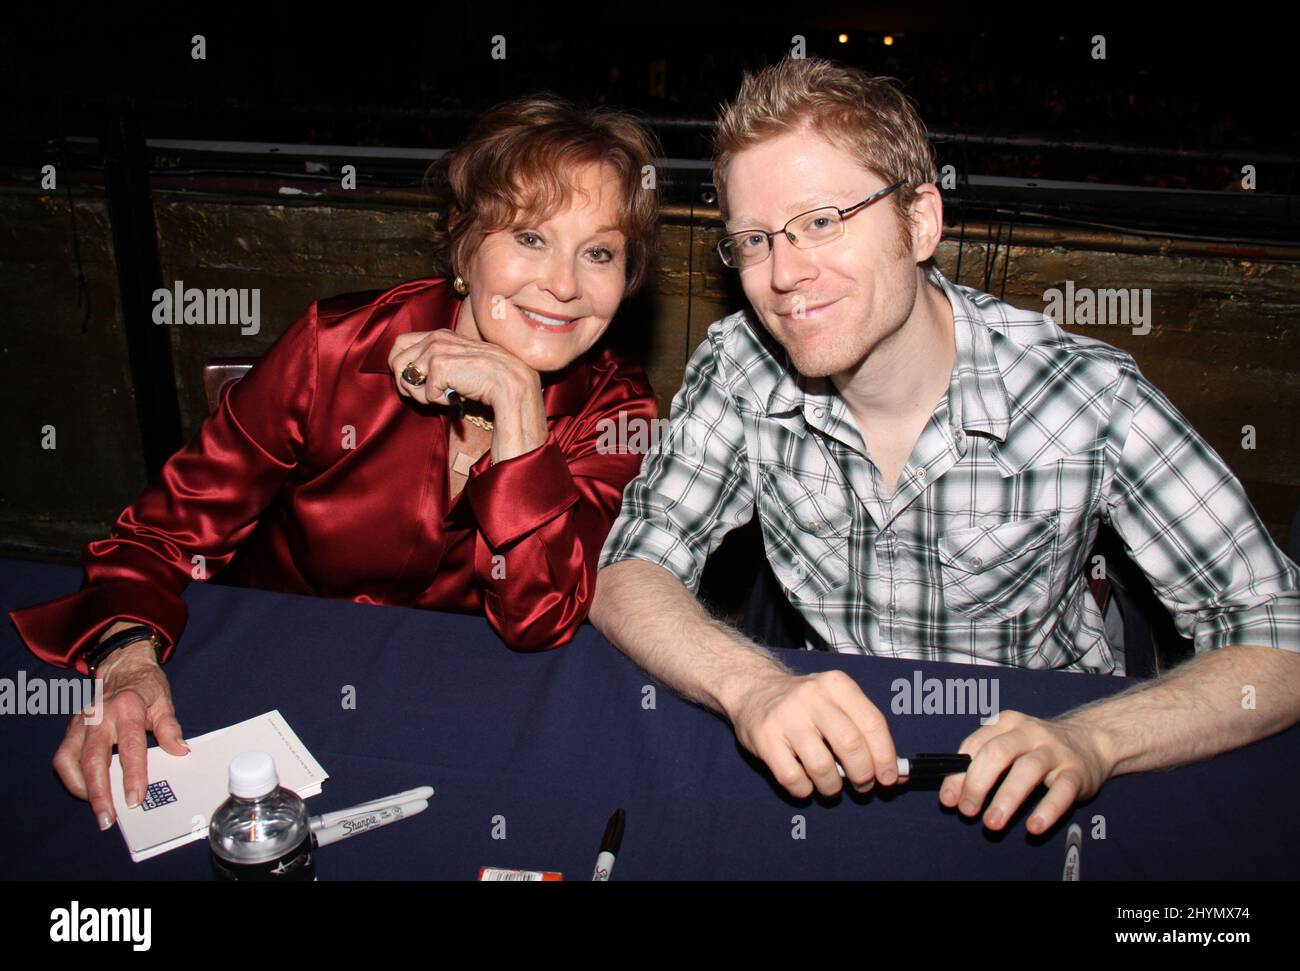 FILE PHOTO: Actress Marj Dusay passed away at the age of 83 years on January 28, 2020. Marj Dusay & Anthony Rapp Broadway Cares/ Equity Fights Aids 23rd Annual Flea Market & Grand Auction. Held at Roseland Ballroom on September 27, 2009. Stock Photo